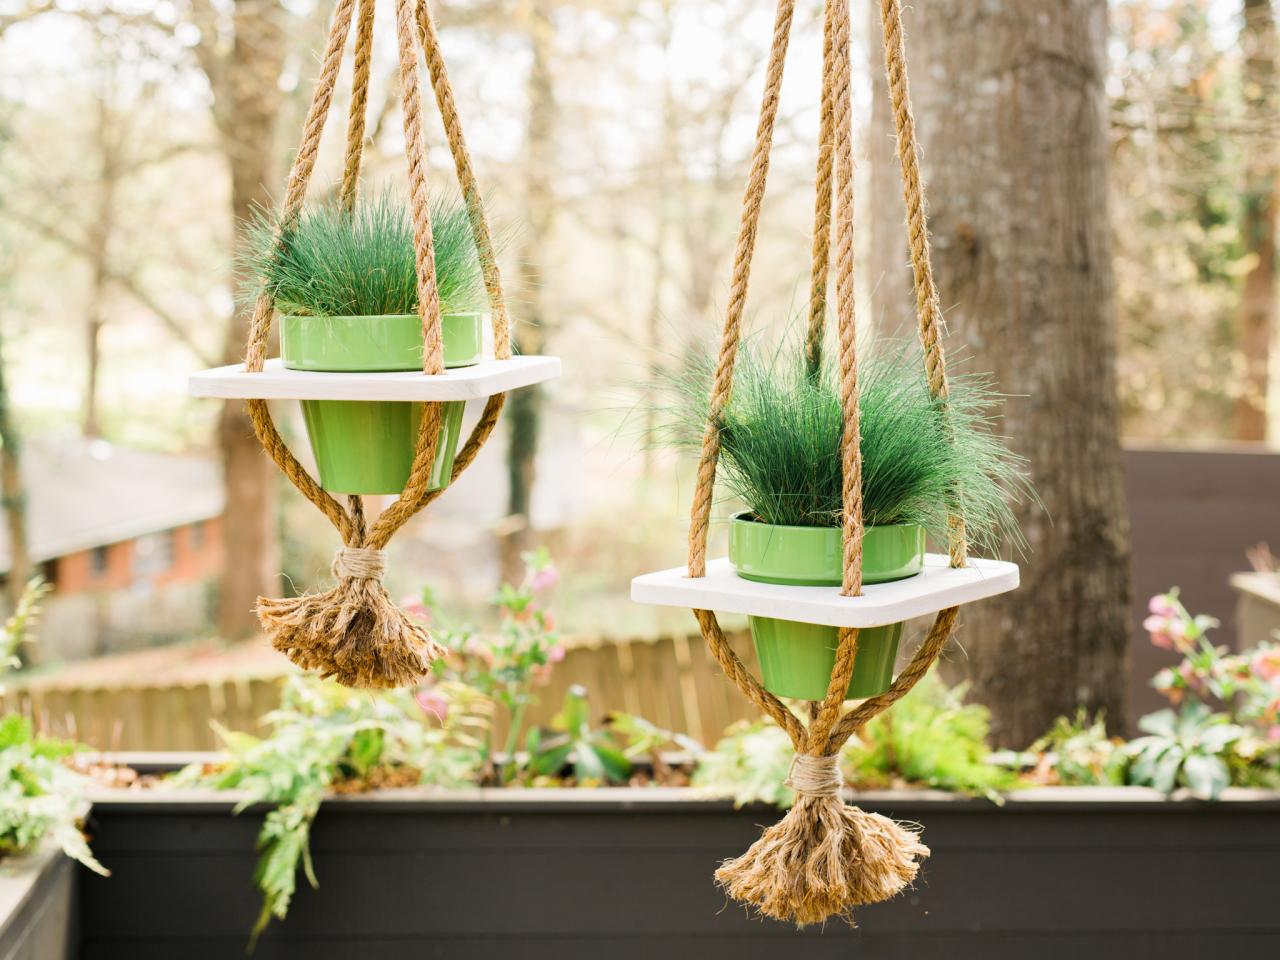 Plant Hanger Made of Rope and Board